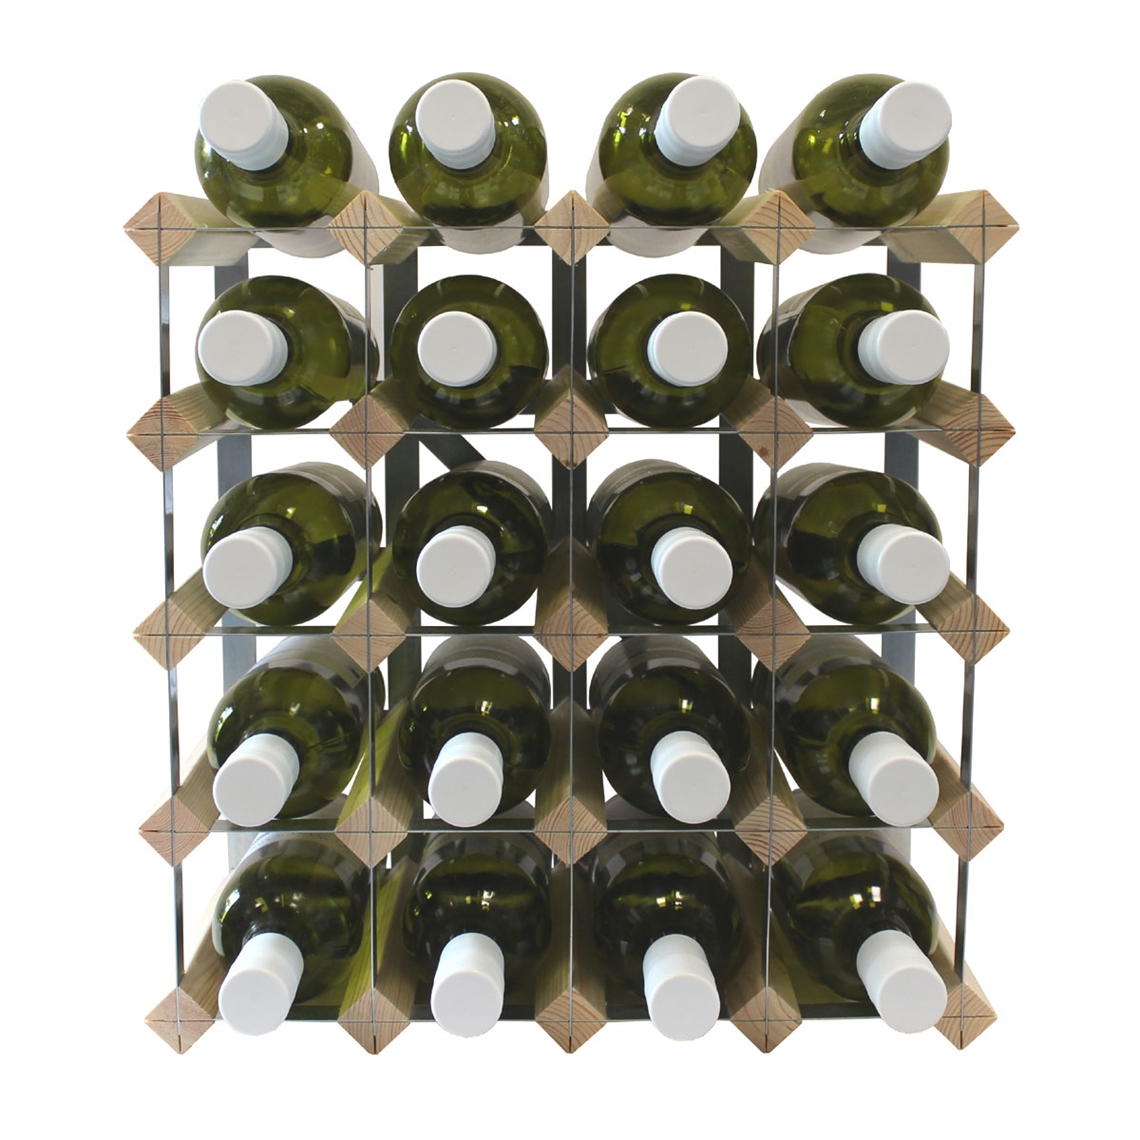 View more display wine racks from our Assembled Wine Racks range